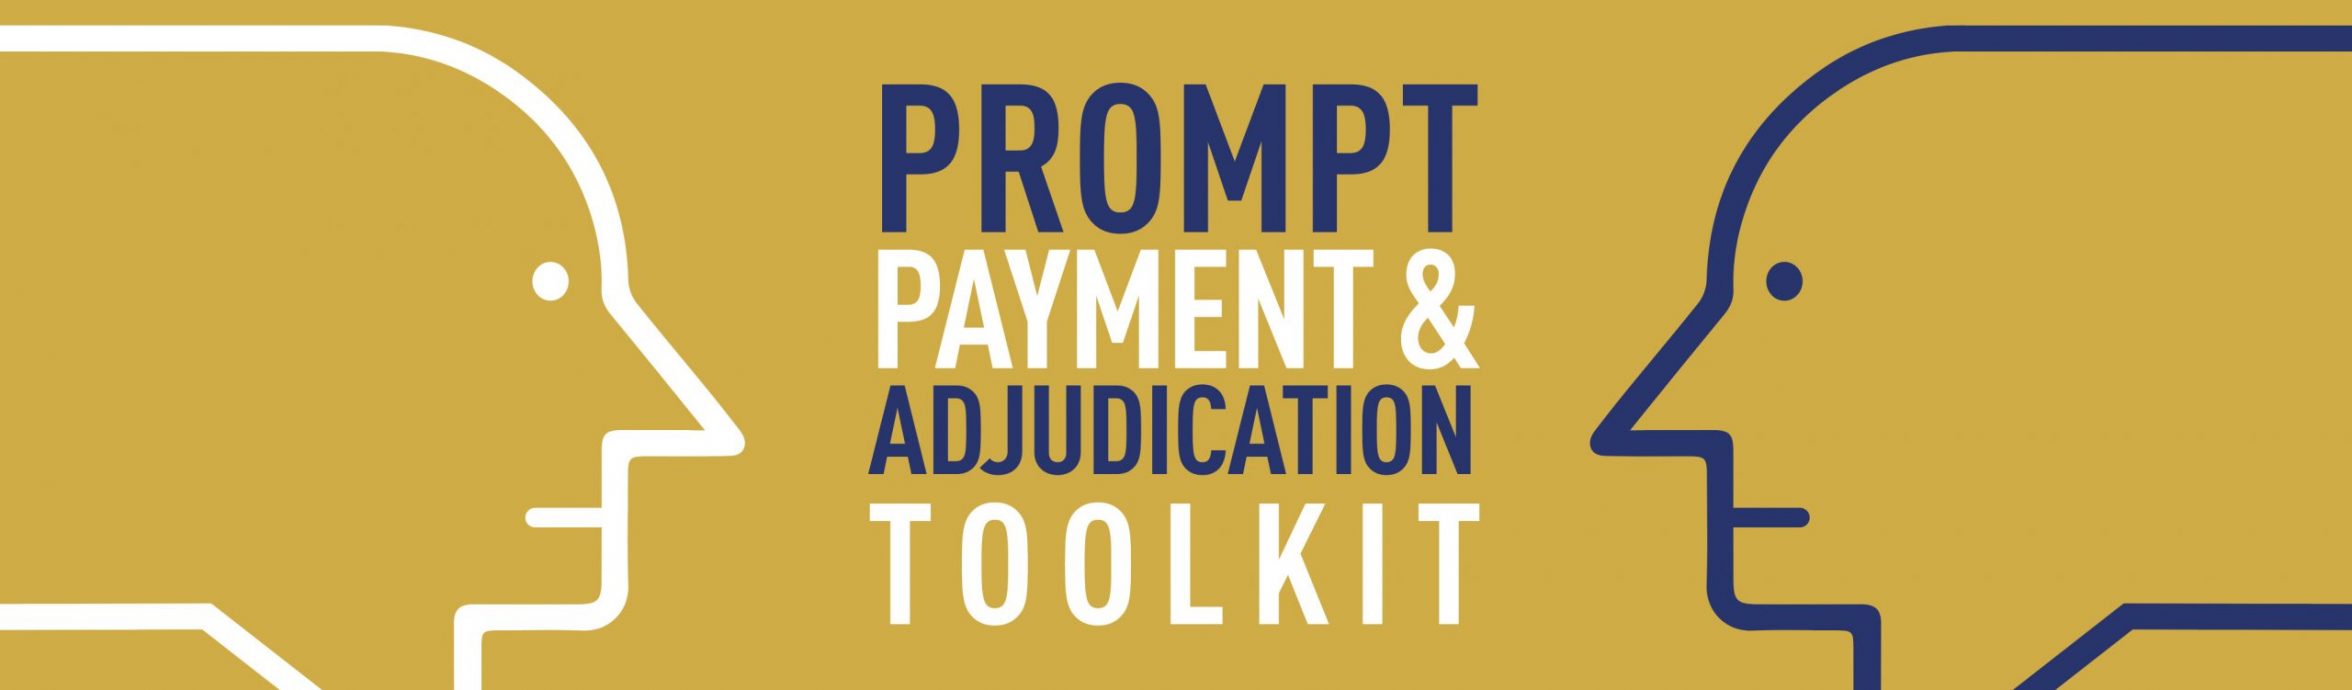 Prompt Payment Toolbox Header